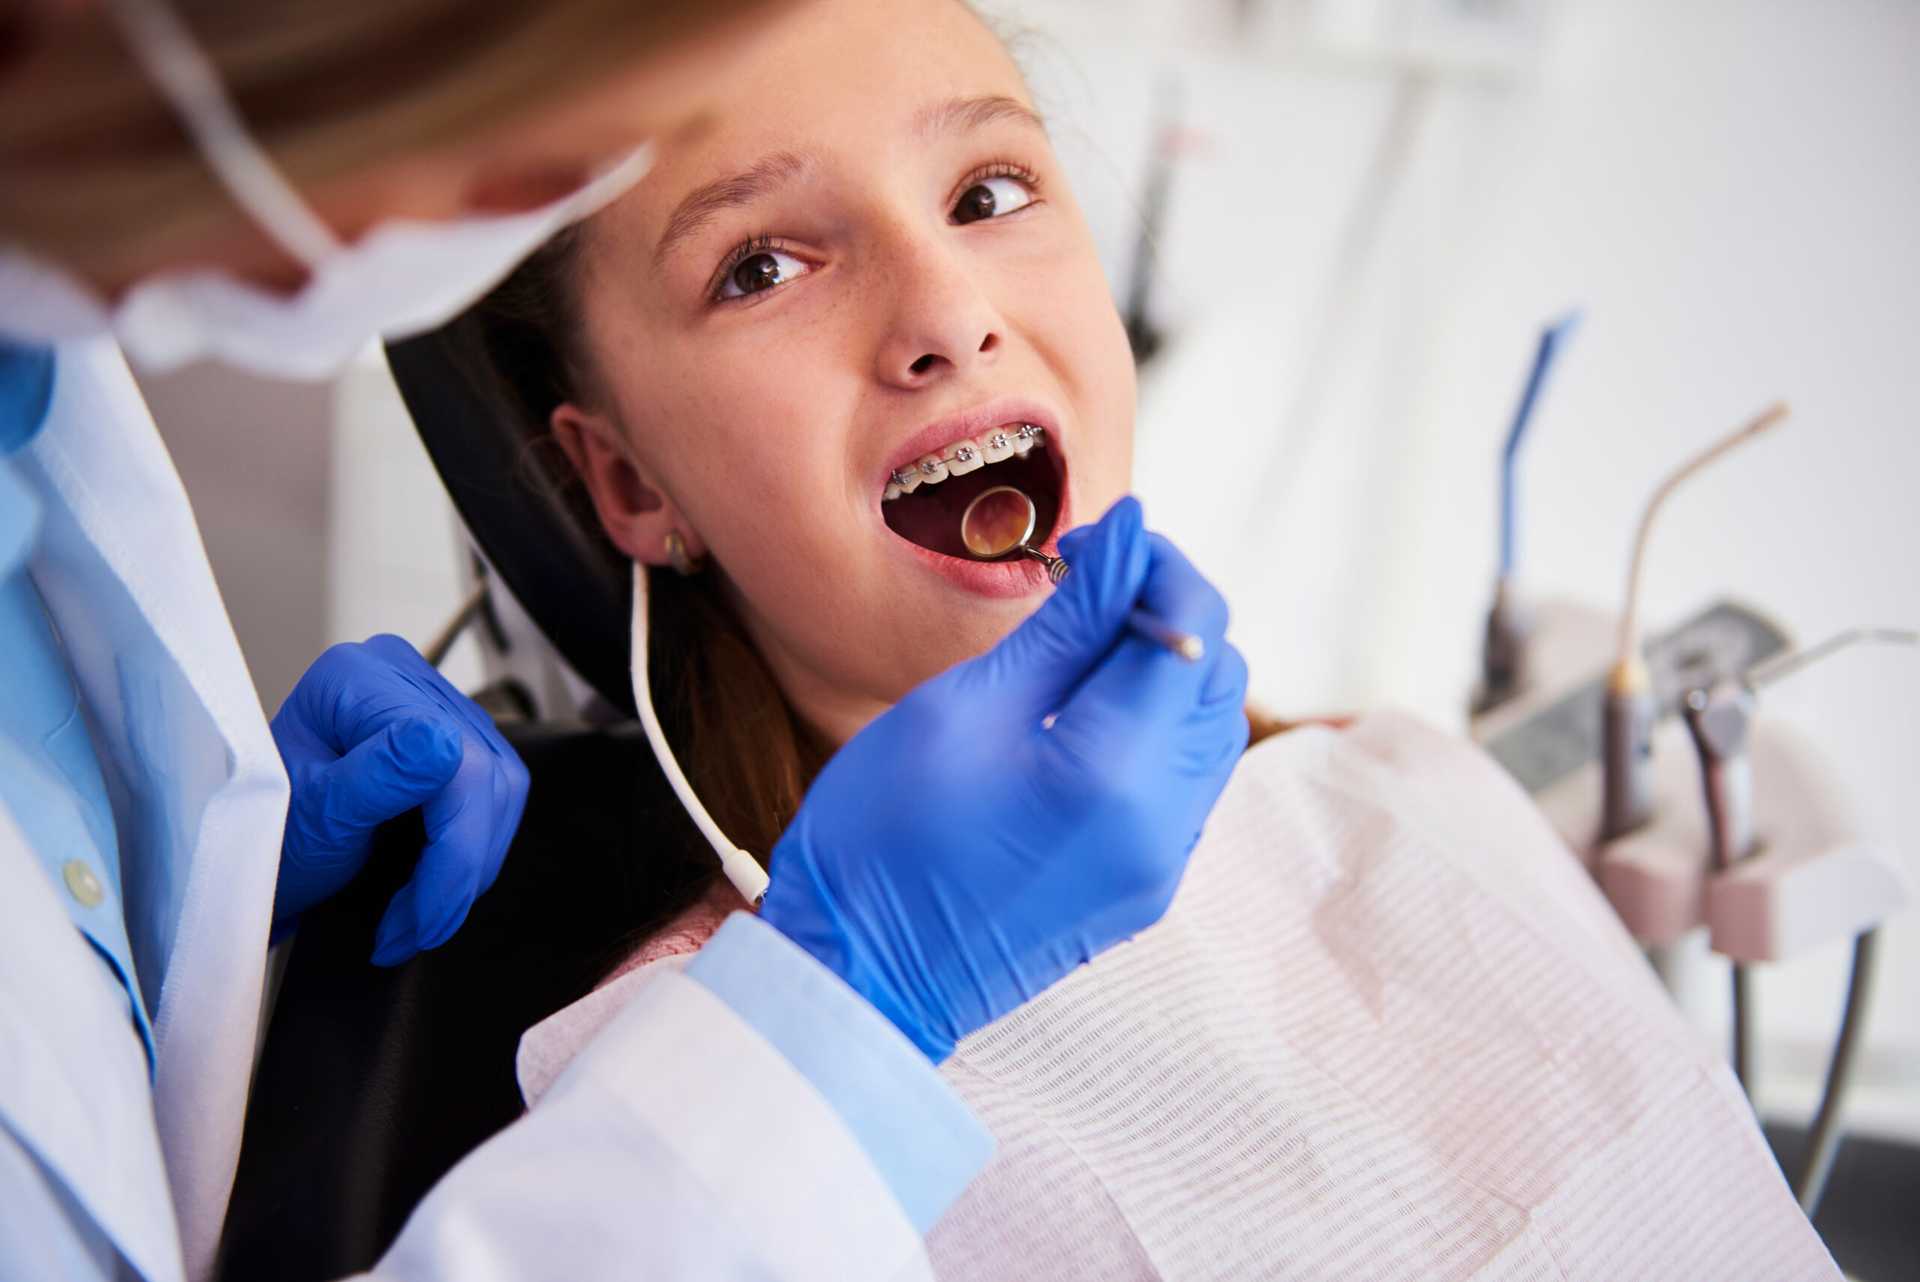 Part,of,orthodontist,examining,child's,teeth,in,dentist's,office